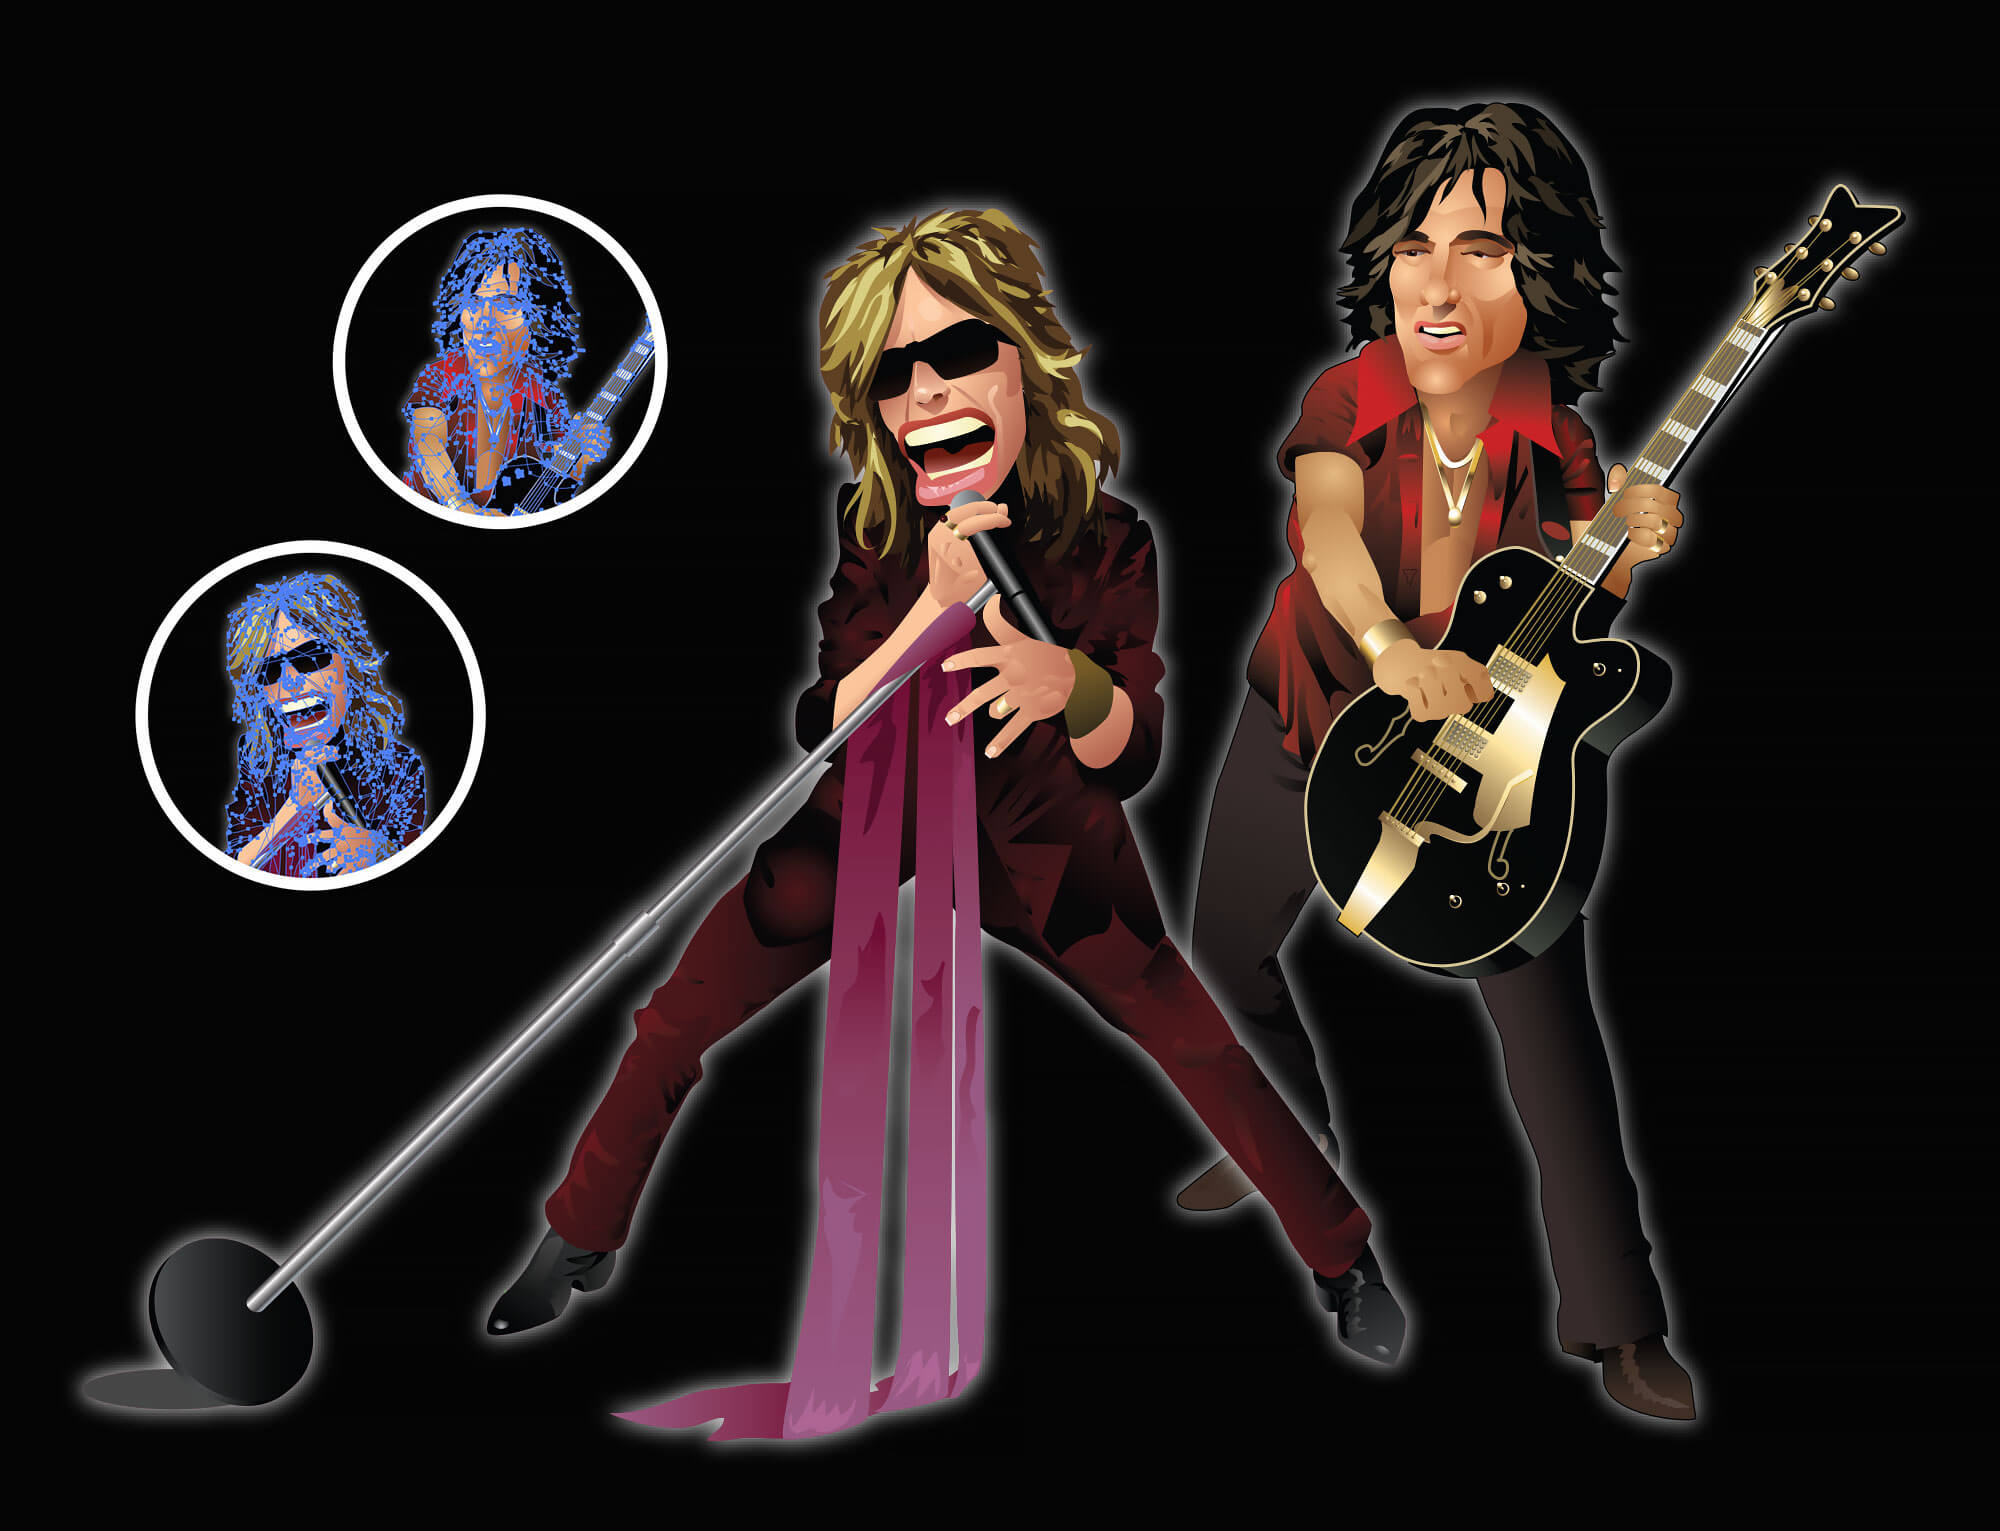 Caricatures of Steven Tyler and Joe Perry